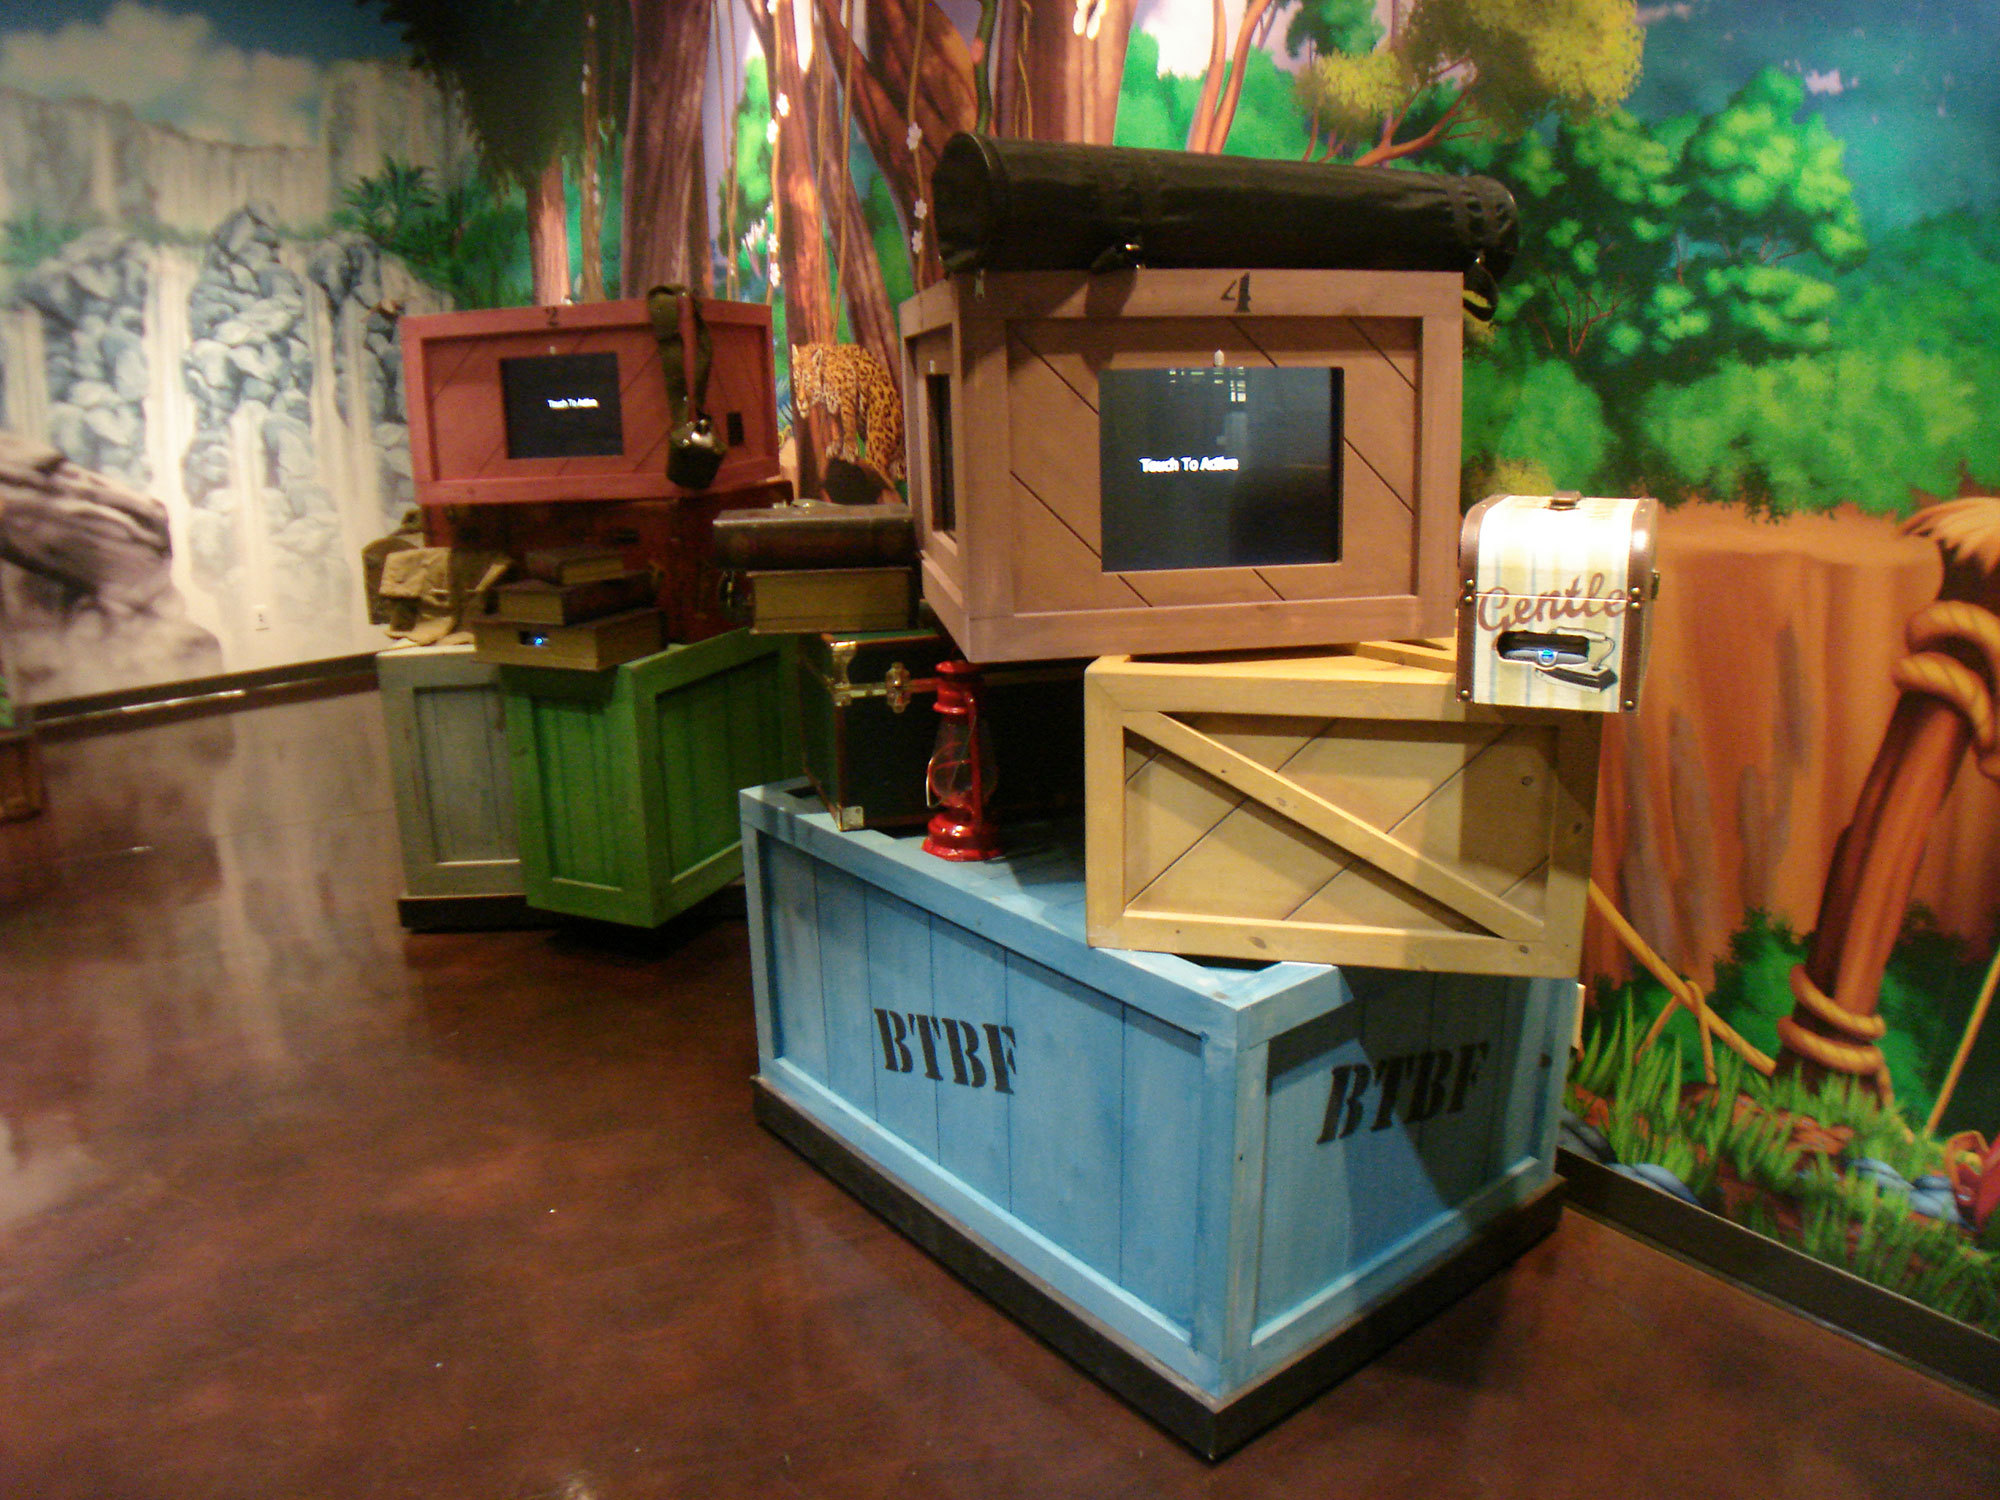 3D crates, books and lamps as a check-in station in a Jungle themed space at Bent Tree Fellowship Church.